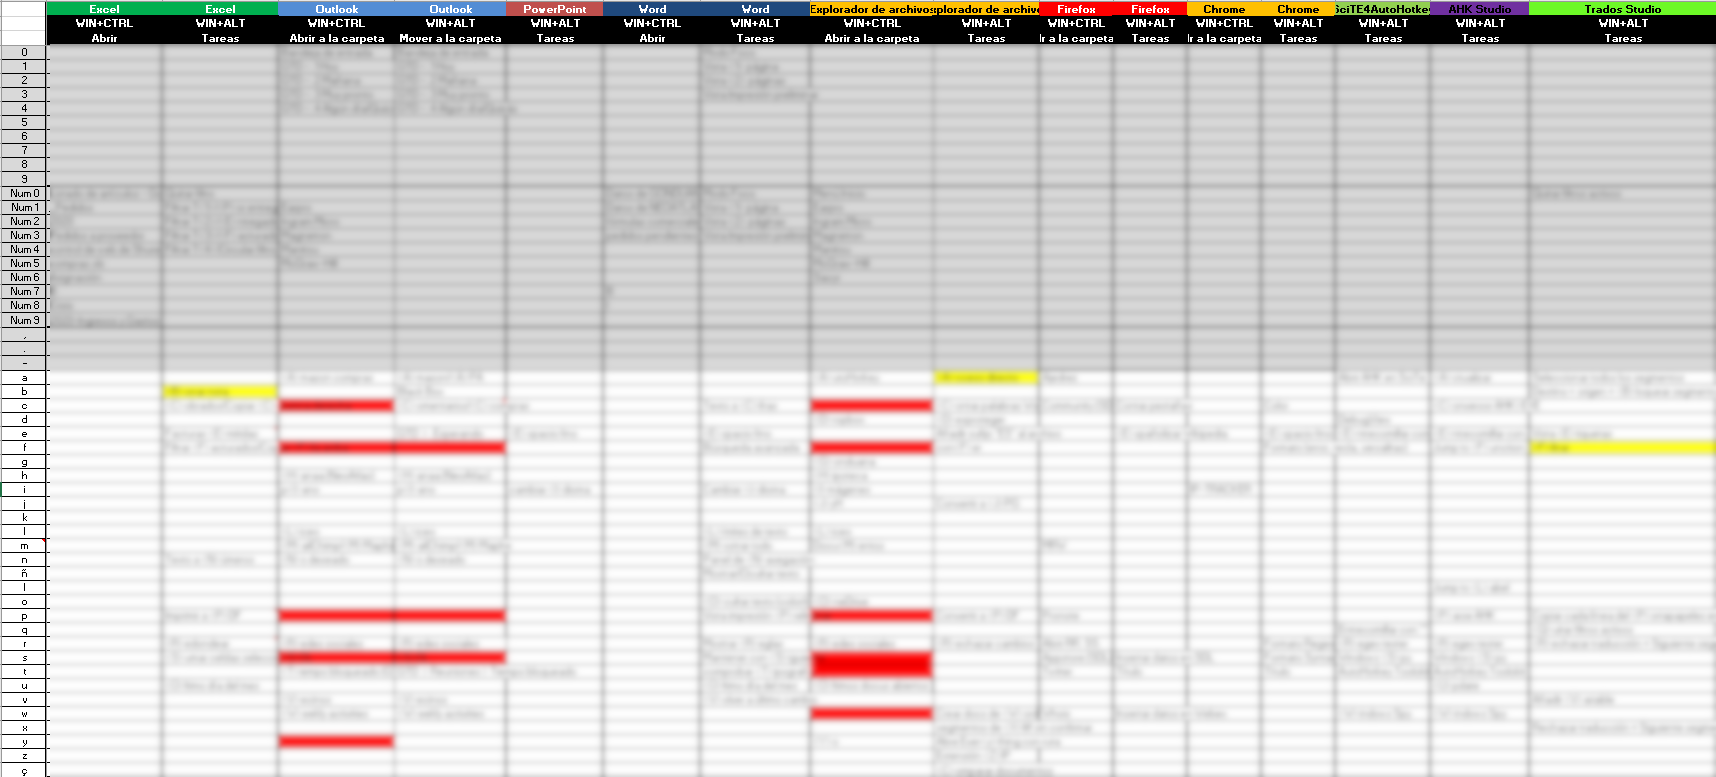 Spreadsheet with keyboard shortcuts for various applications including Excel, Outlook, PowerPoint, Word, File Explorer, Firefox, Chrome, AutoHotkey, and Trados Studio. Some cells are highlighted in red and yellow indicating important or frequently used shortcuts.